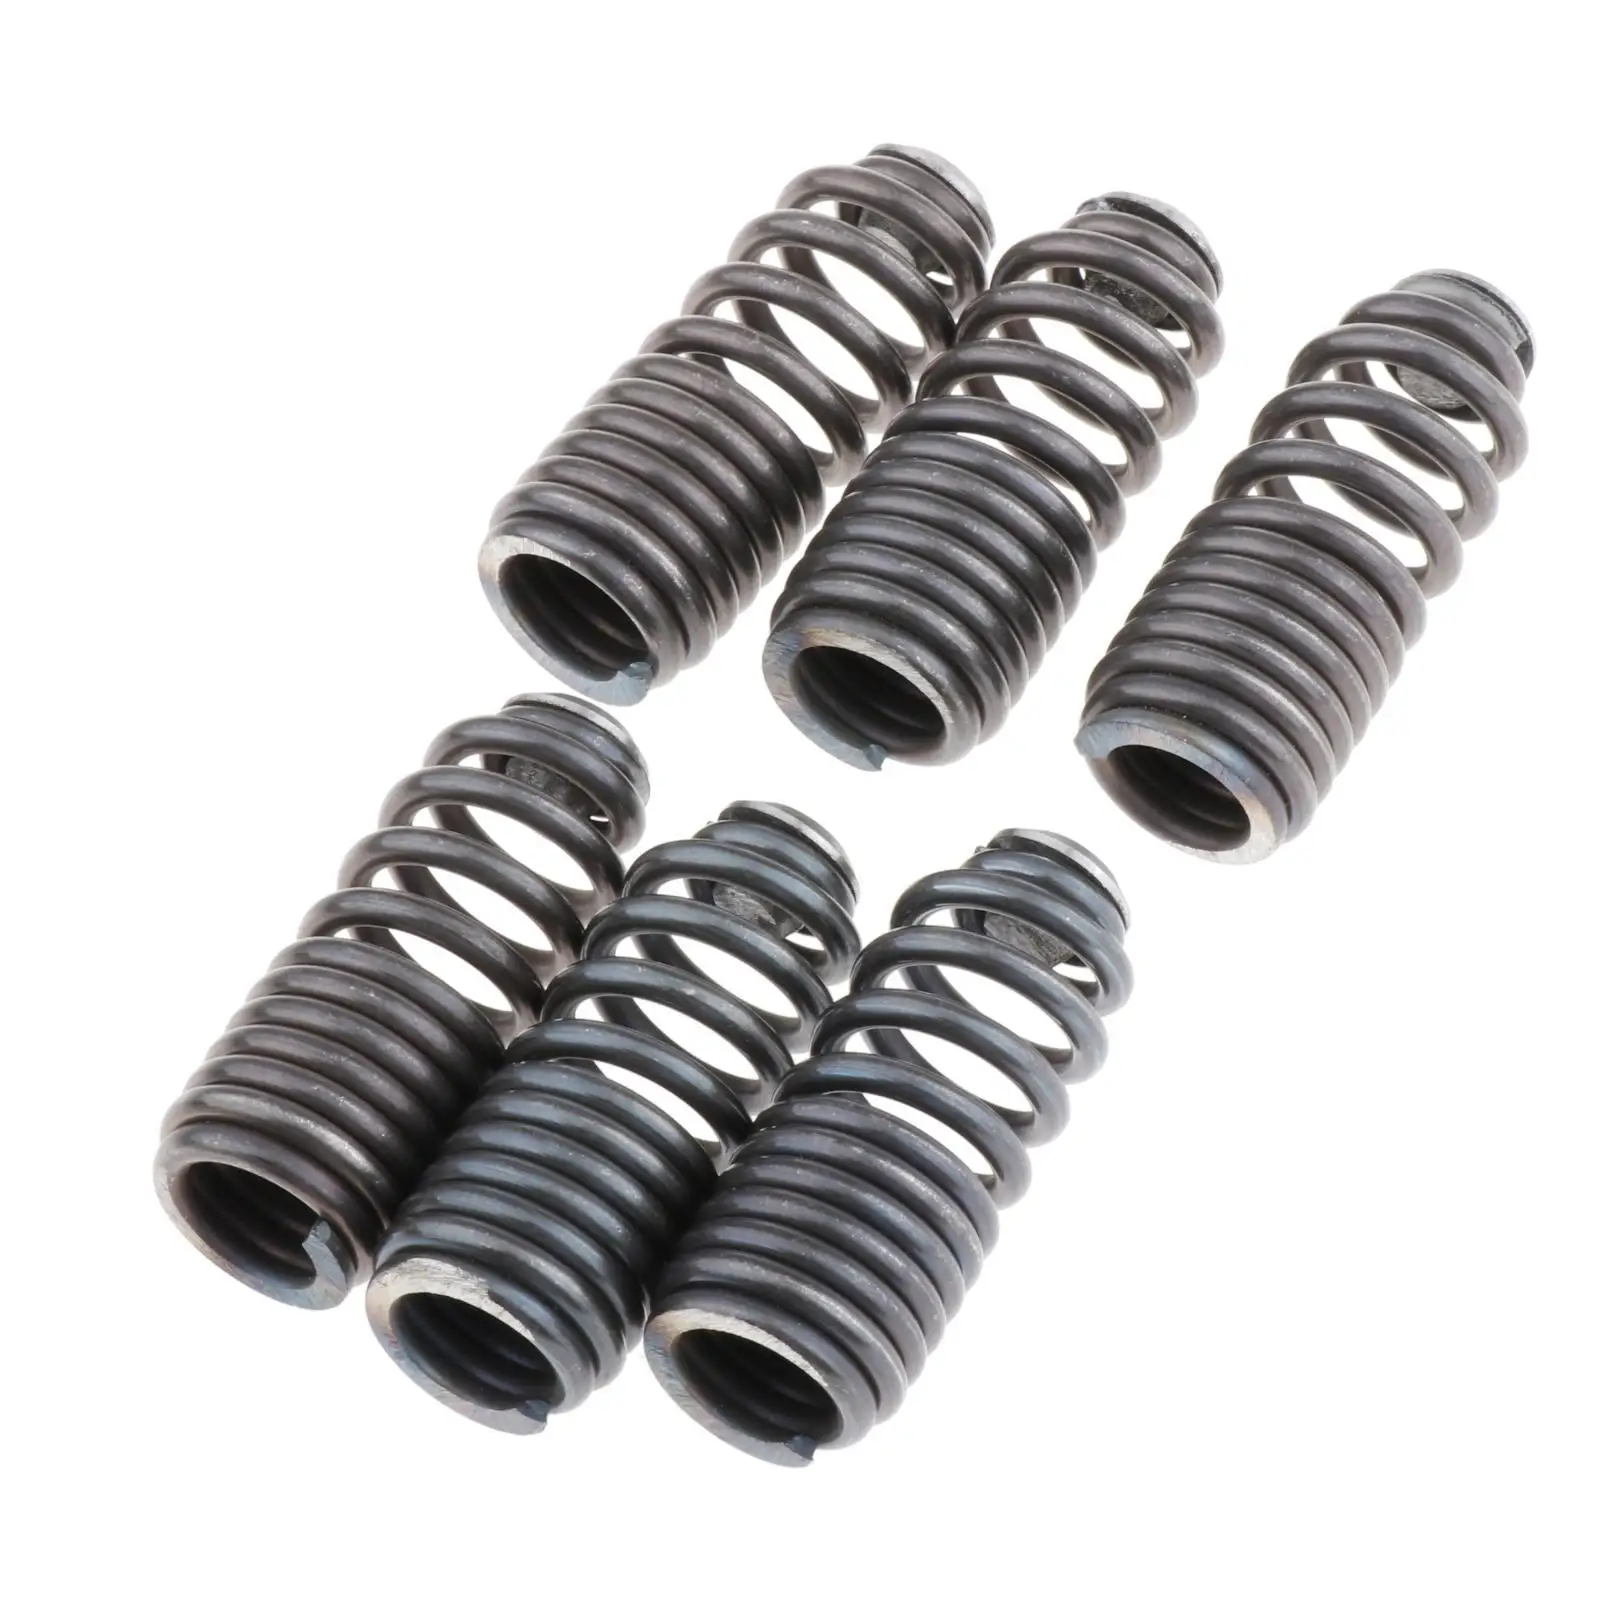 Set of 6 Lost Motion Assembly 16A2 B16A3 B18C5,Easy to Install,High quality Part 12-05-0200